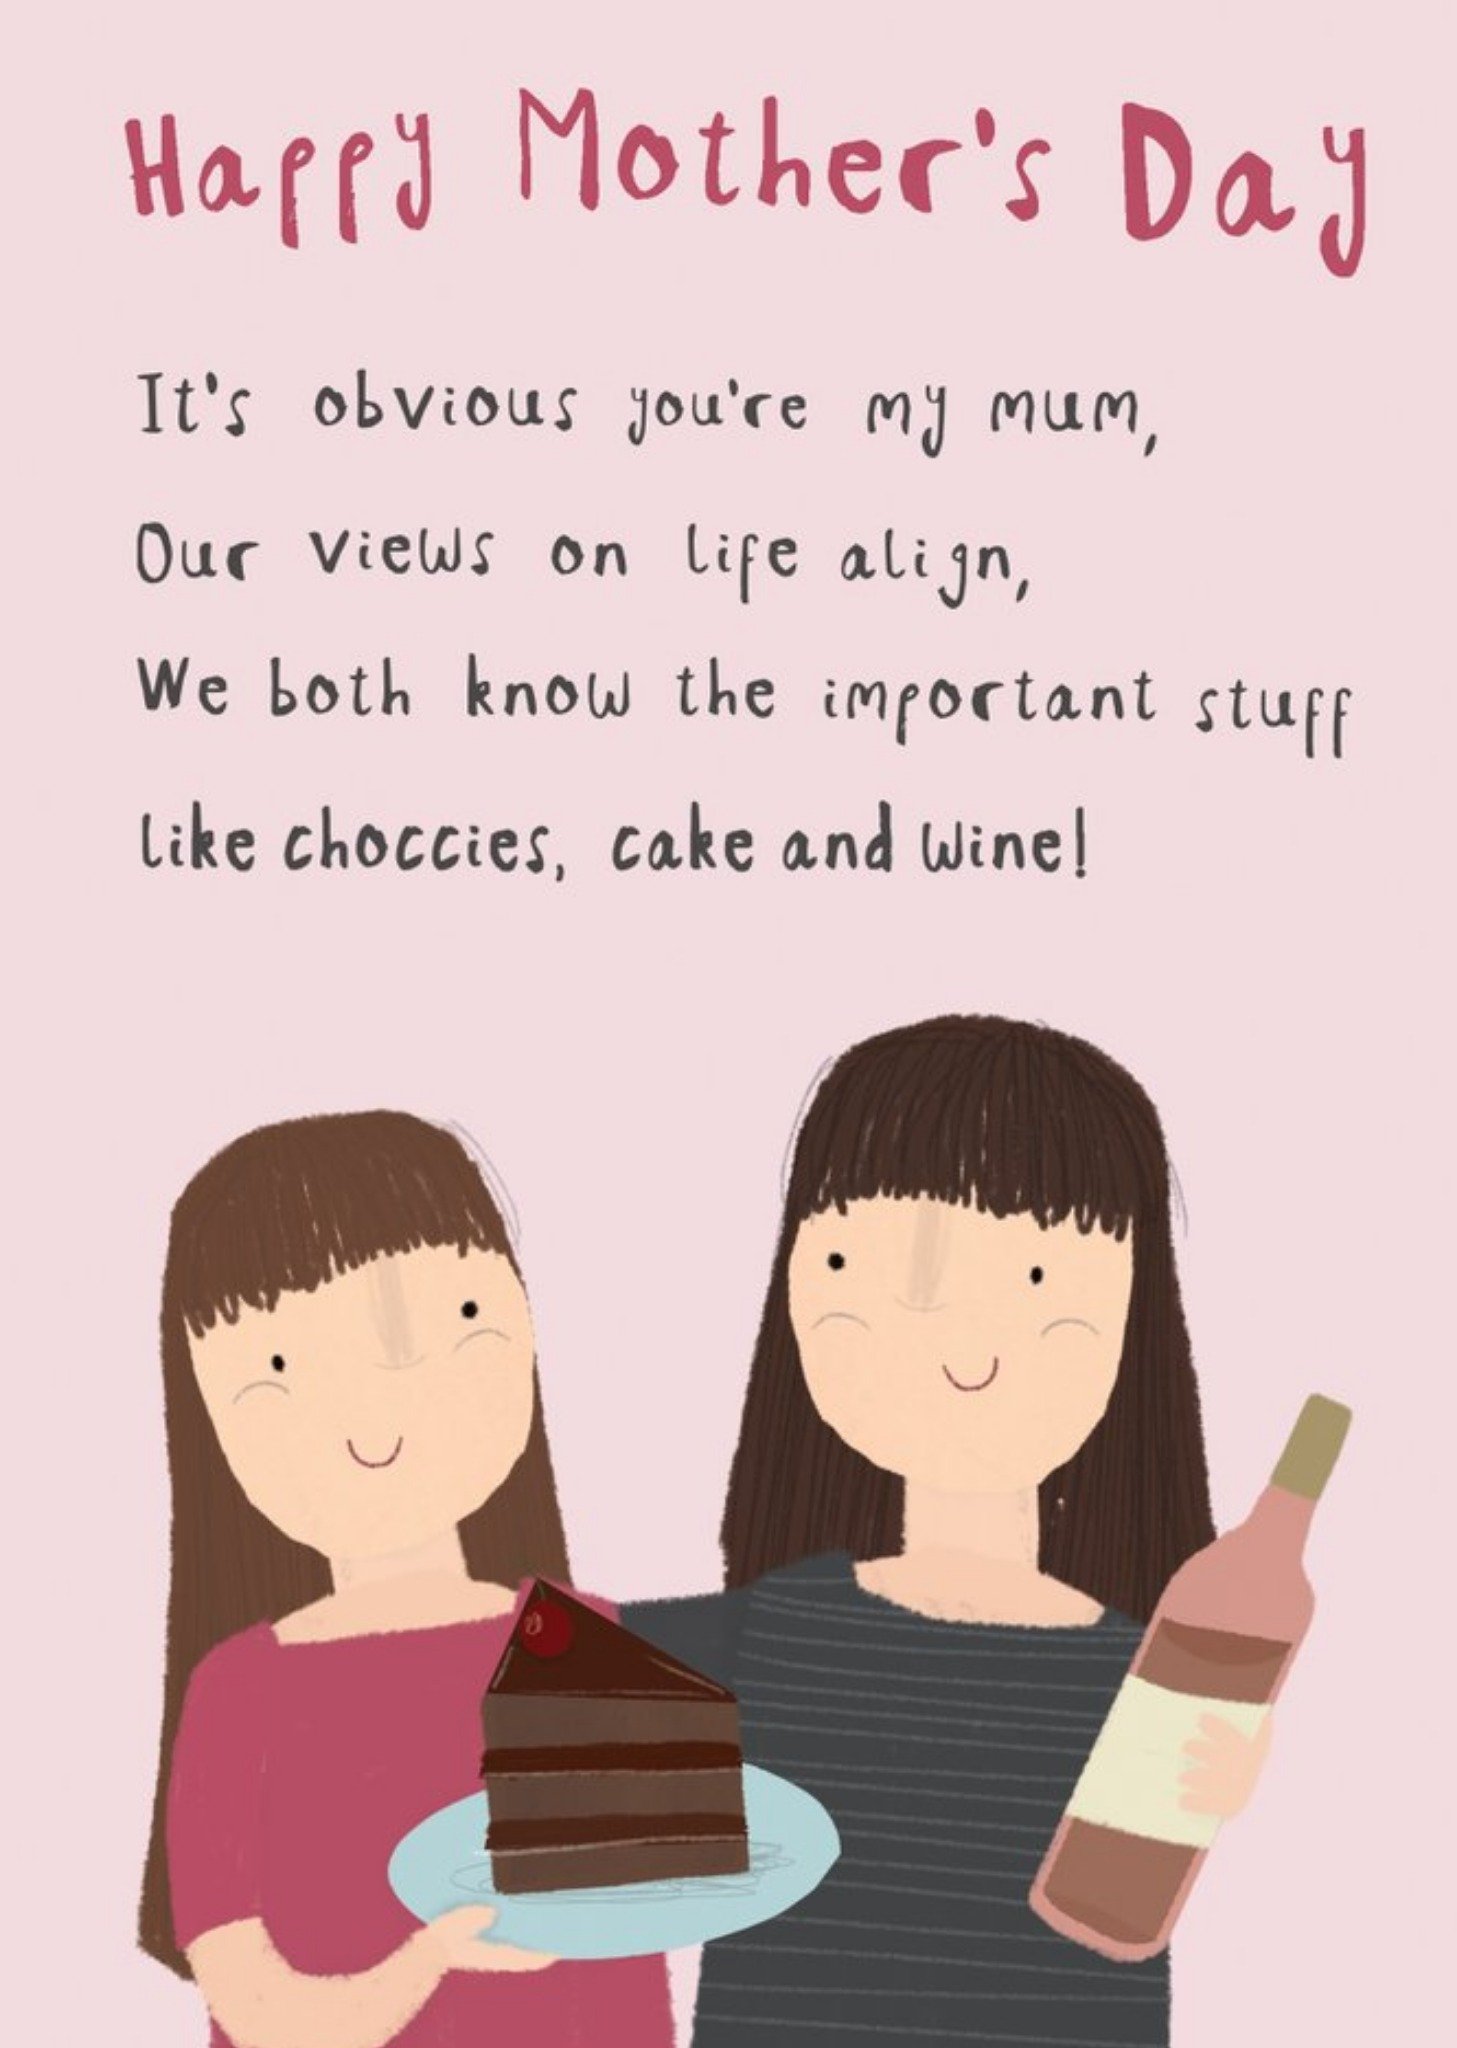 Moonpig Illustration Of A Mother And Daughter With Cake And Wine Sweet Mother's Day Card, Large